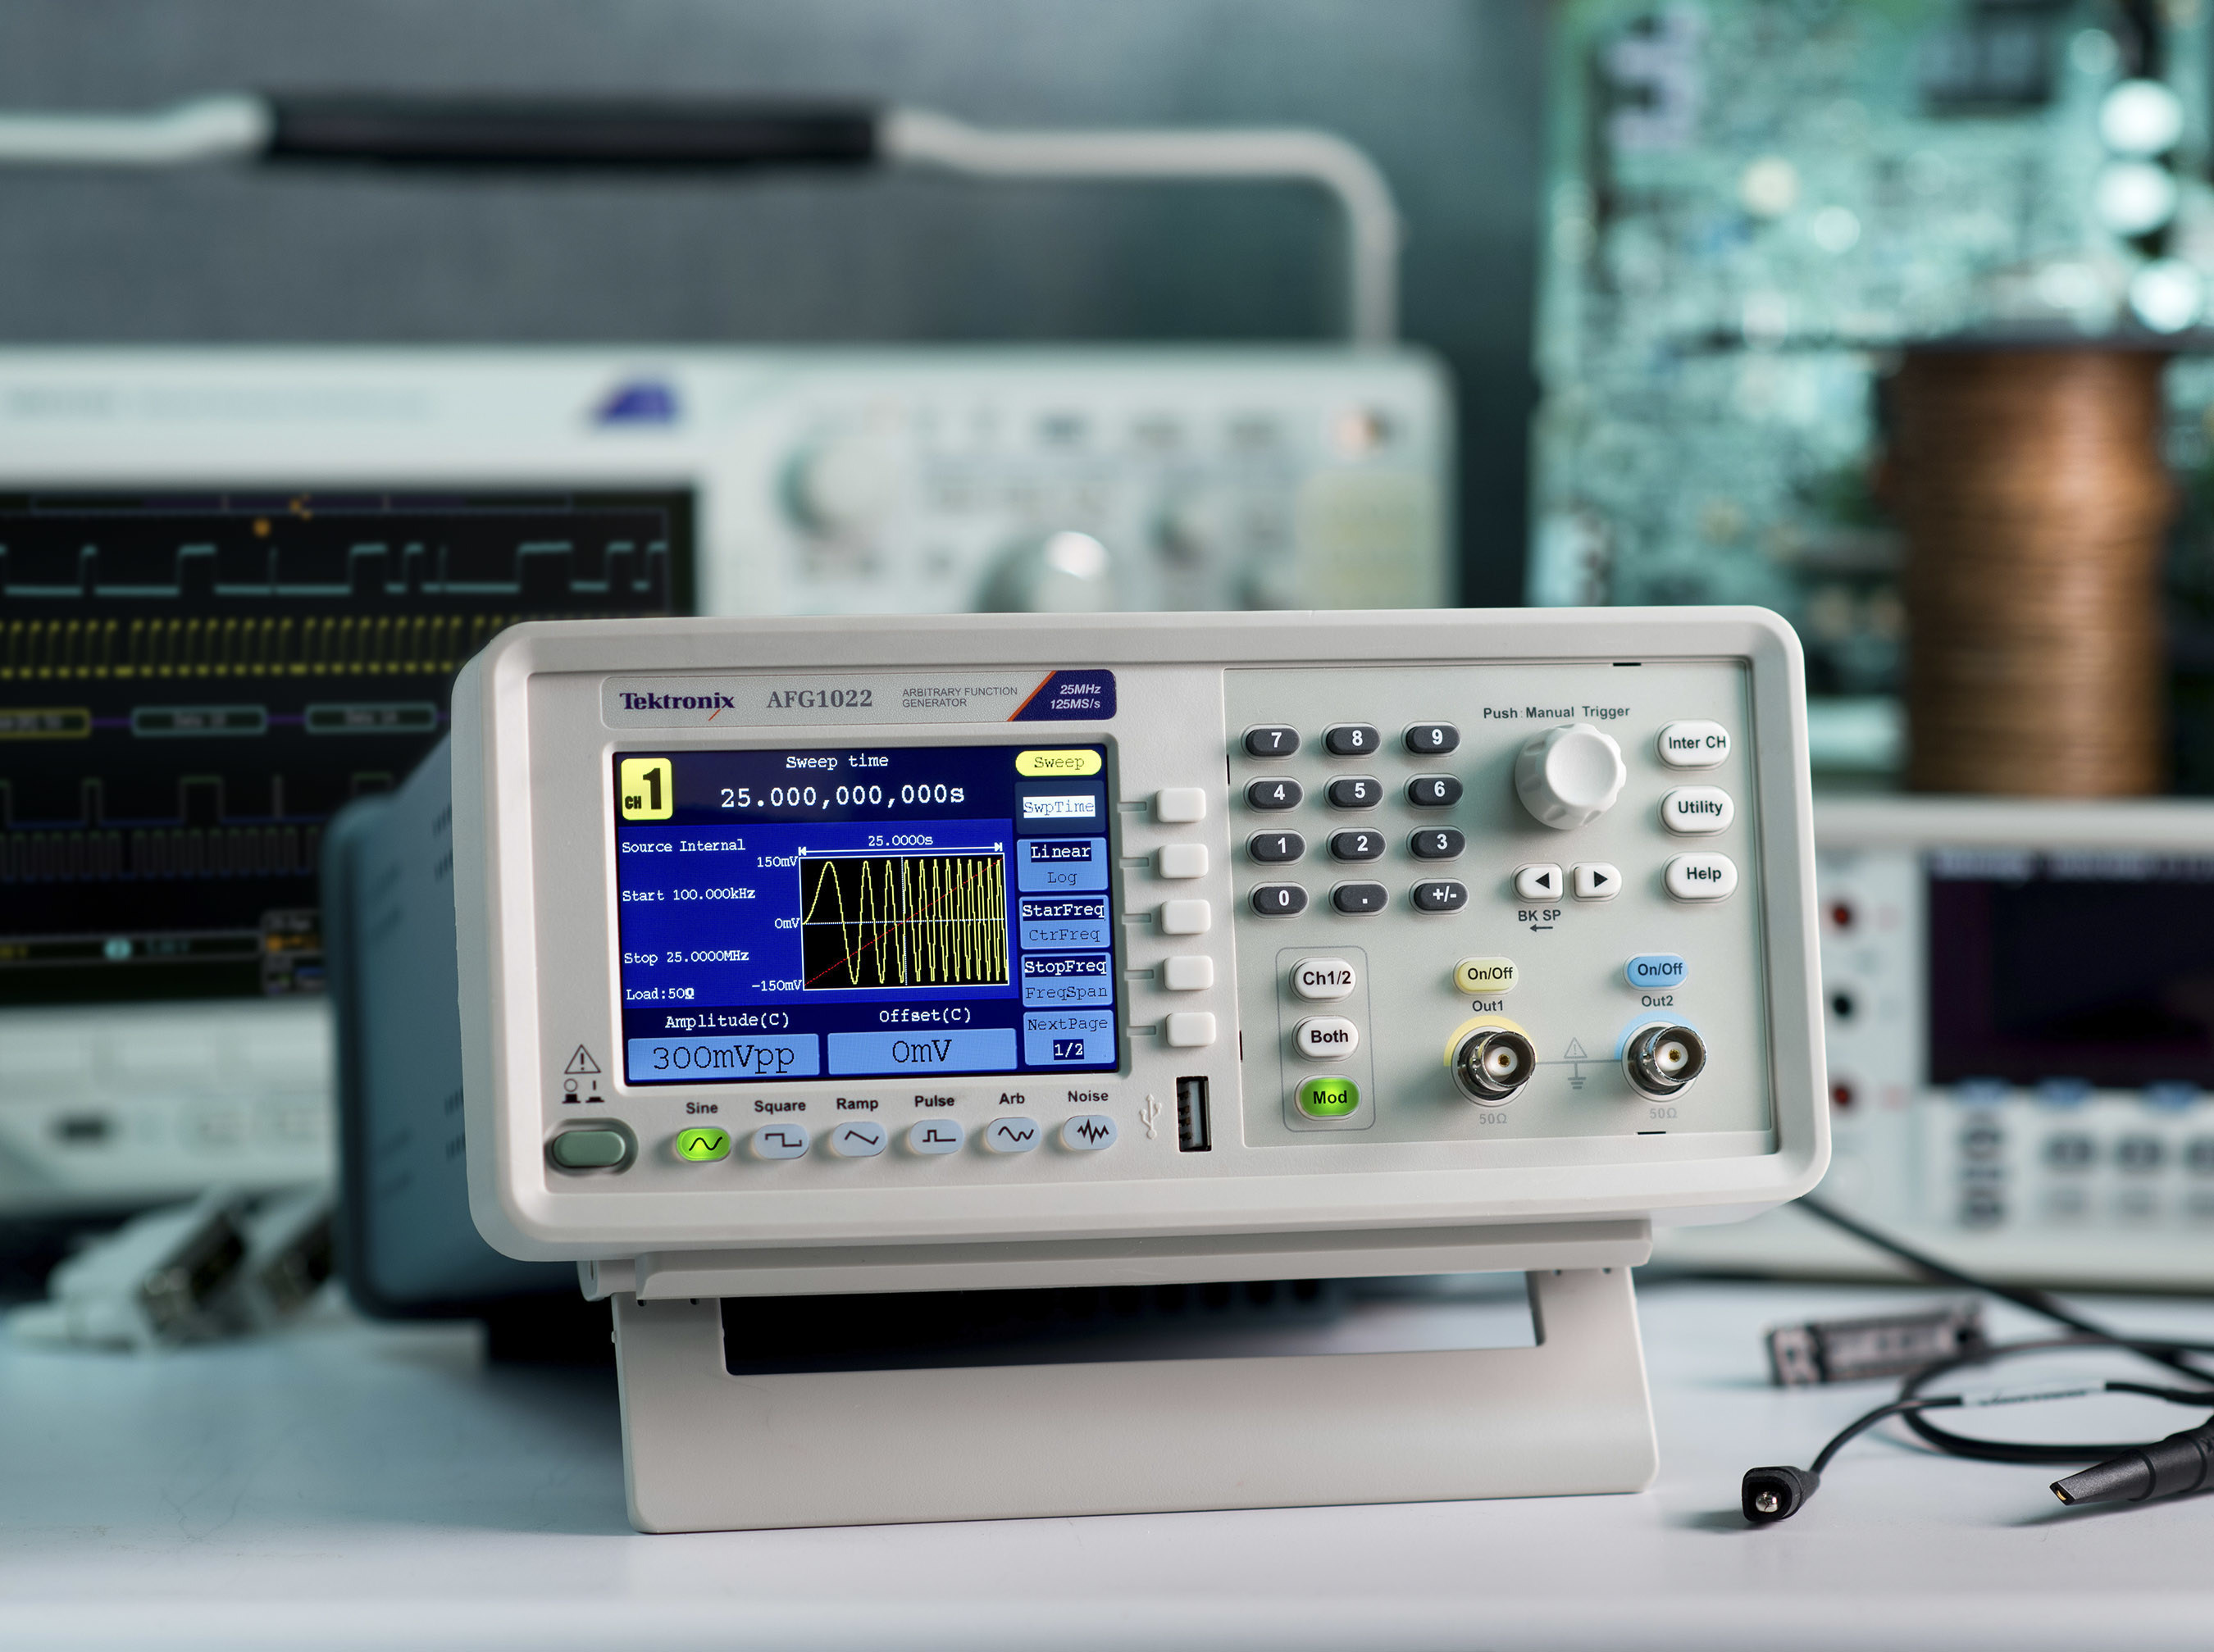 Compared to stand alone AFGs in its price class, the Tektronix AFG1022 offers better performance and greater flexibility. Key performance specifications include dual-channel, 25MHz bandwidth with 1mVpp to 10Vpp output, 14-bit vertical resolution and 1?Hz frequency resolution. It provides a 125 MS/s sample rate along with 64 MB of built-in non-volatile memory and USB memory expansion for user-defined waveforms.